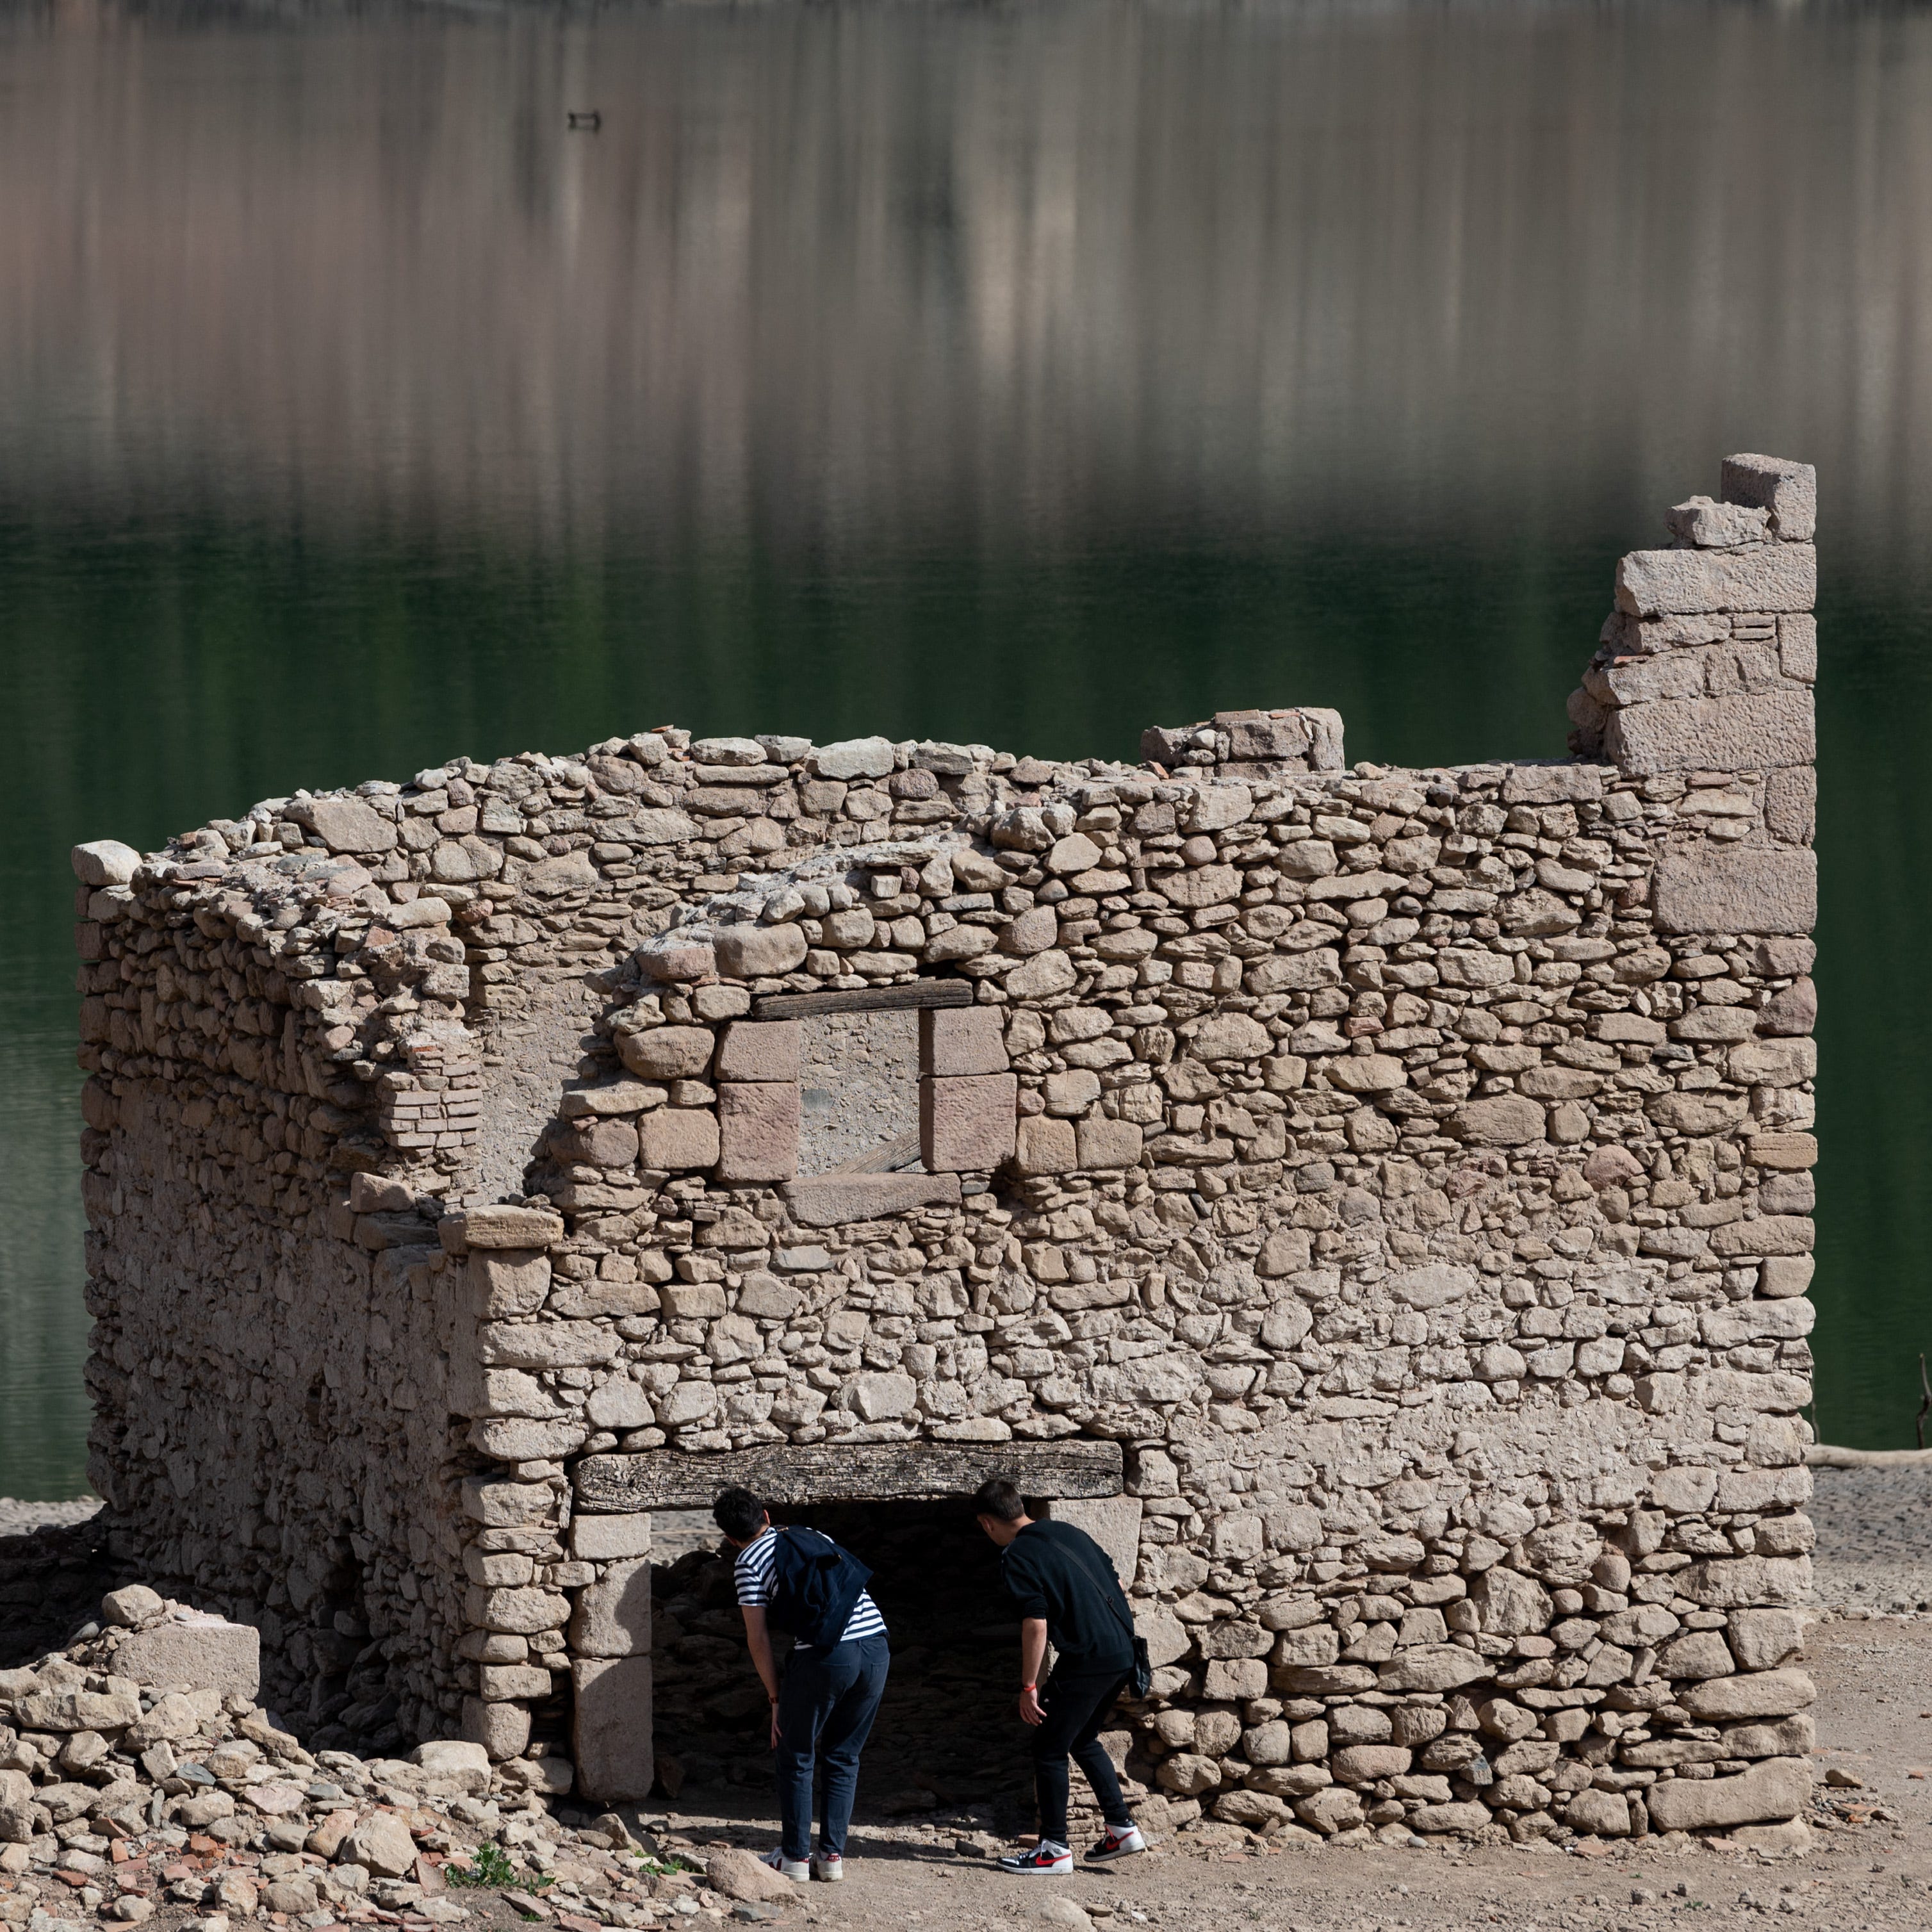 People look into a ruined house of Sant Roma de Sau on the dried banks of the swamp of Sau, located in the province of Girona in Catalonia on April 16, 2023.